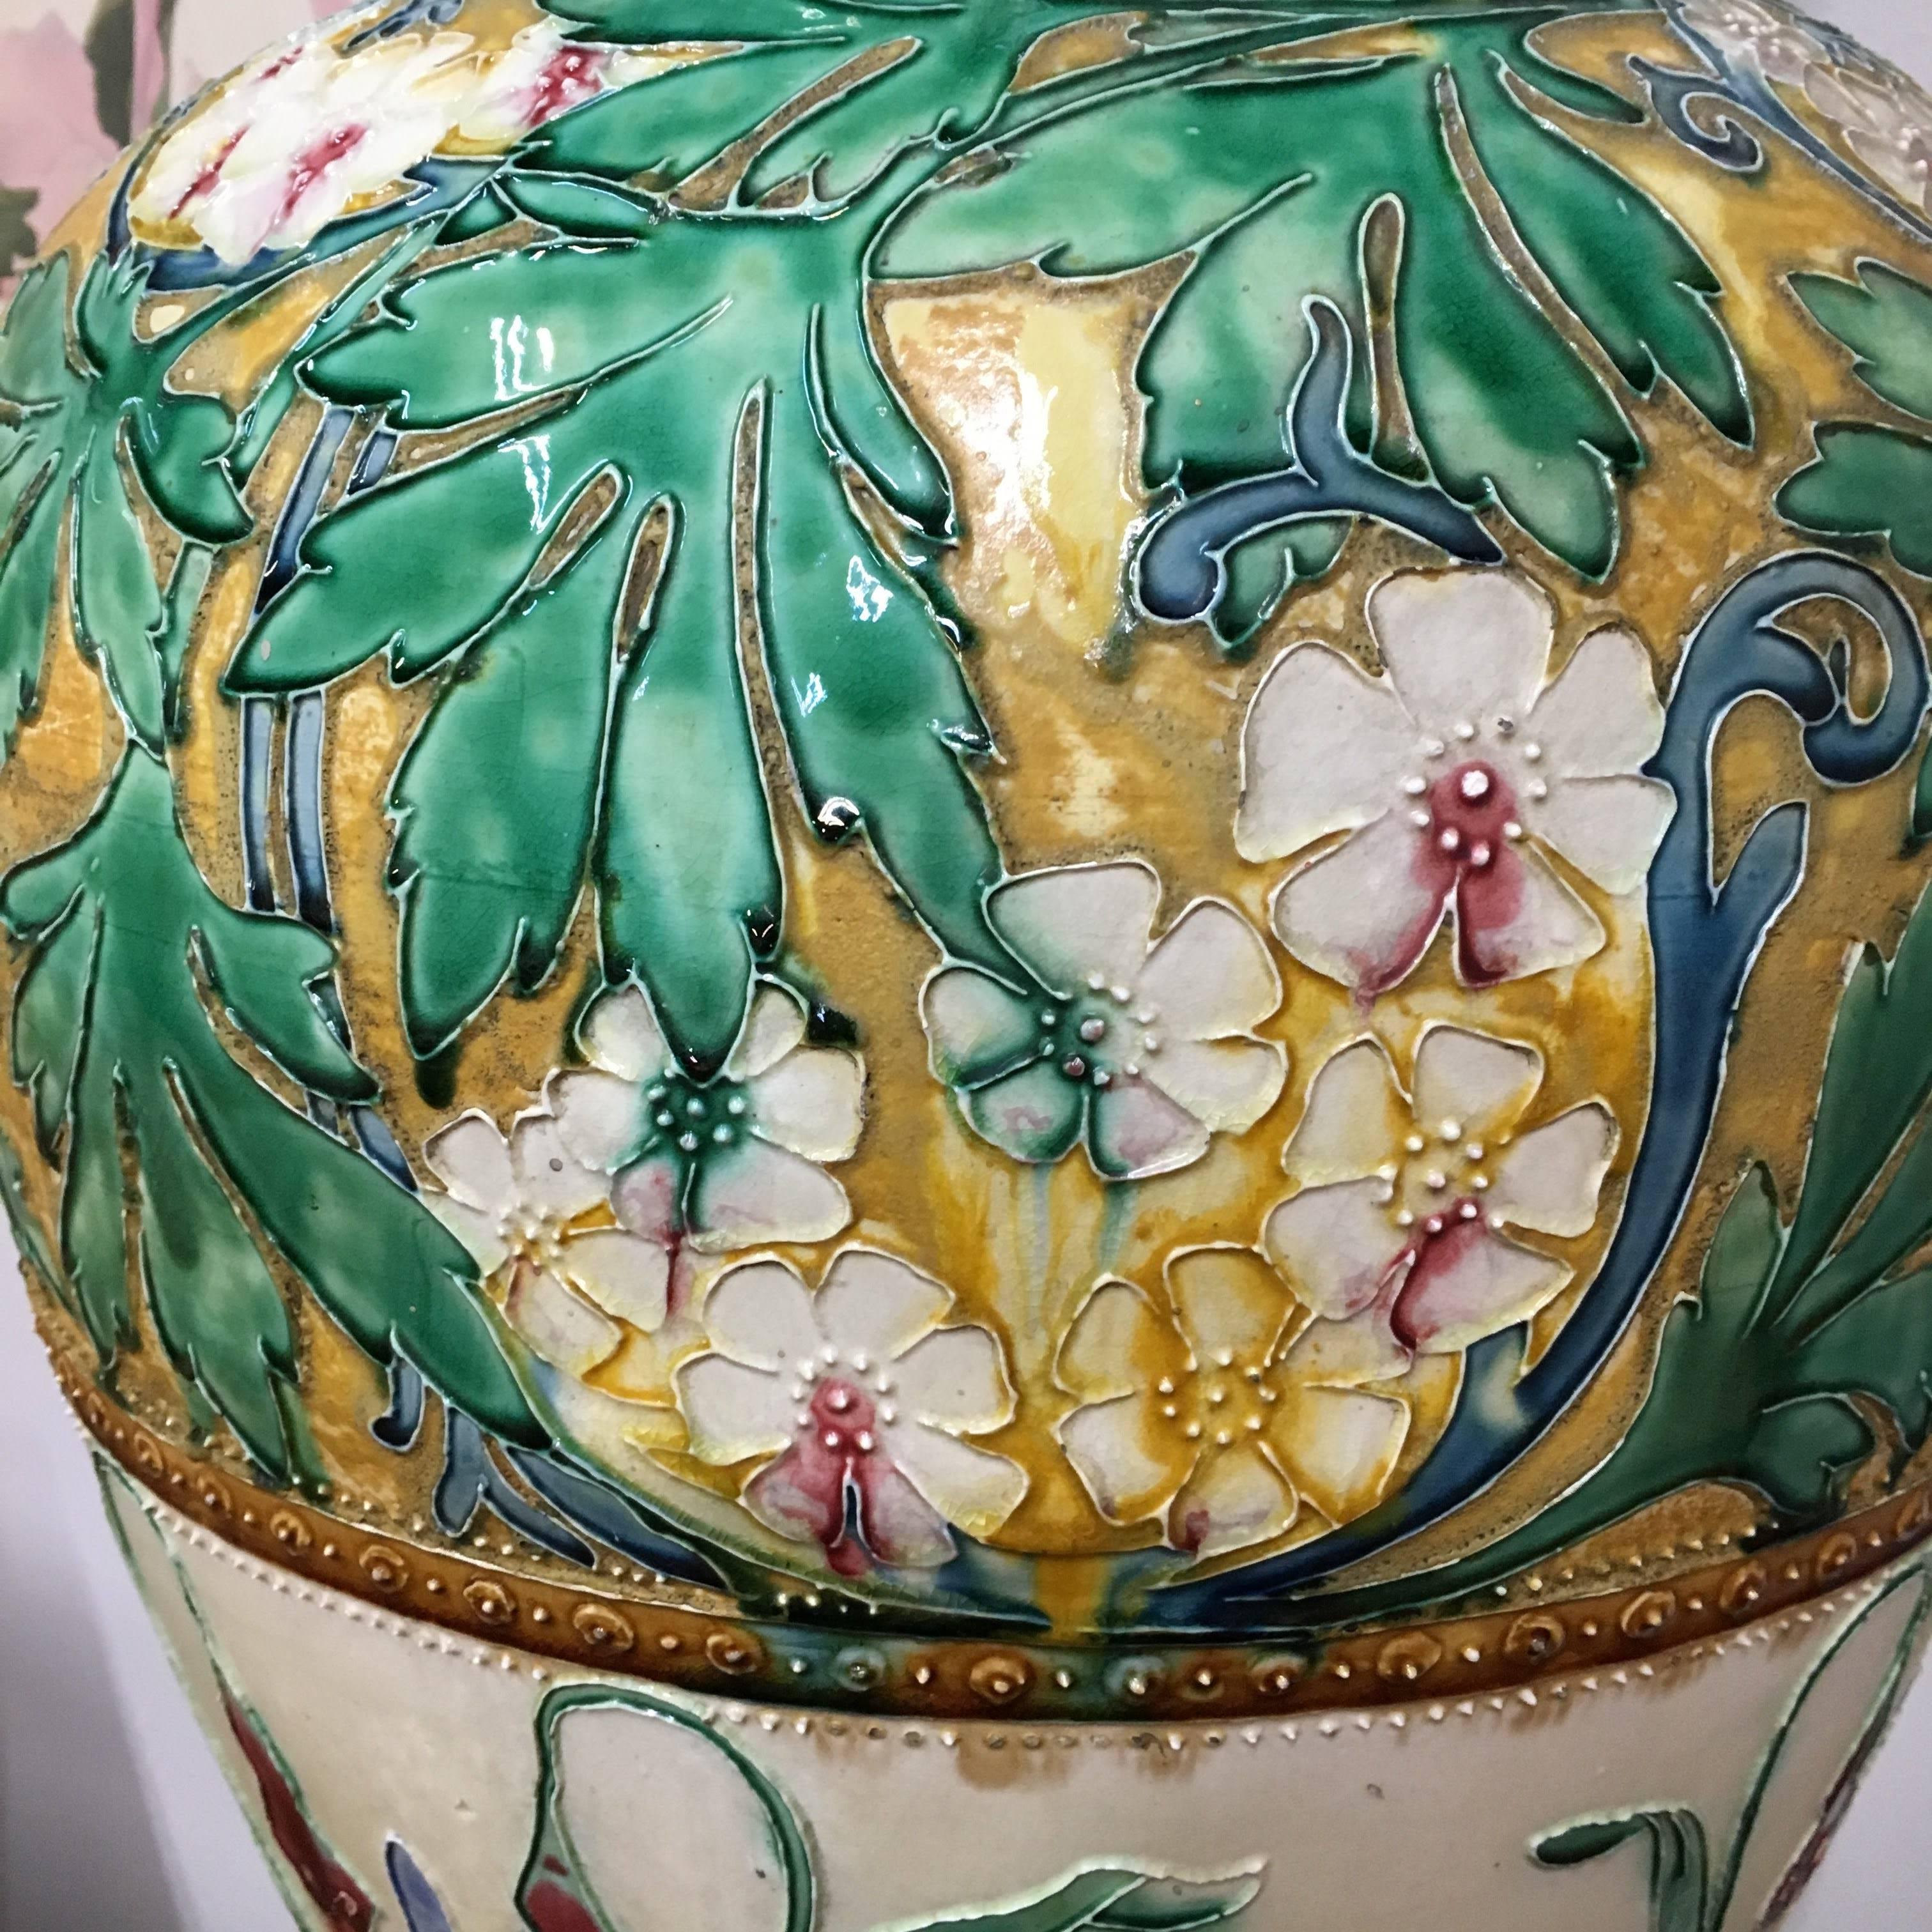 Enameled Late 19th Century Portuguese Palissy Ware Covered Vase in the Art Nouveau Style For Sale